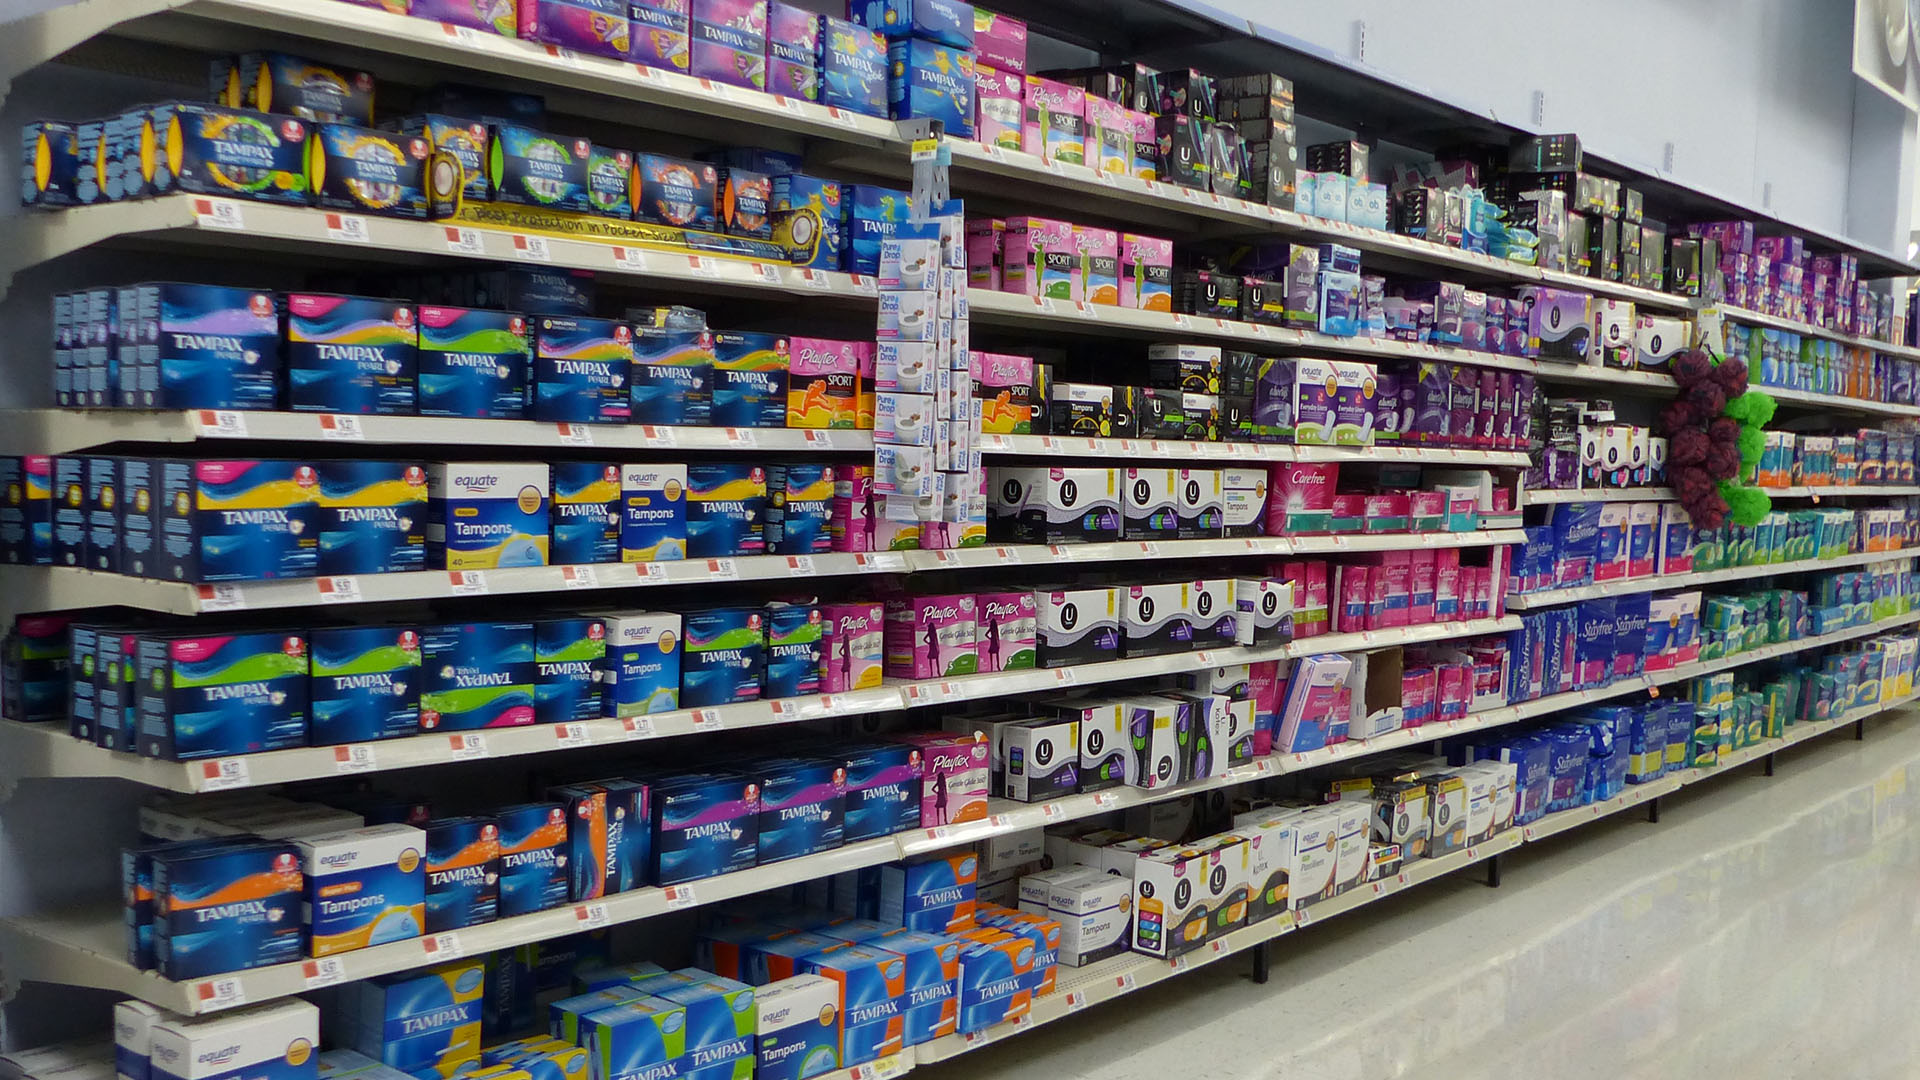 Feminine hygiene products in a store.